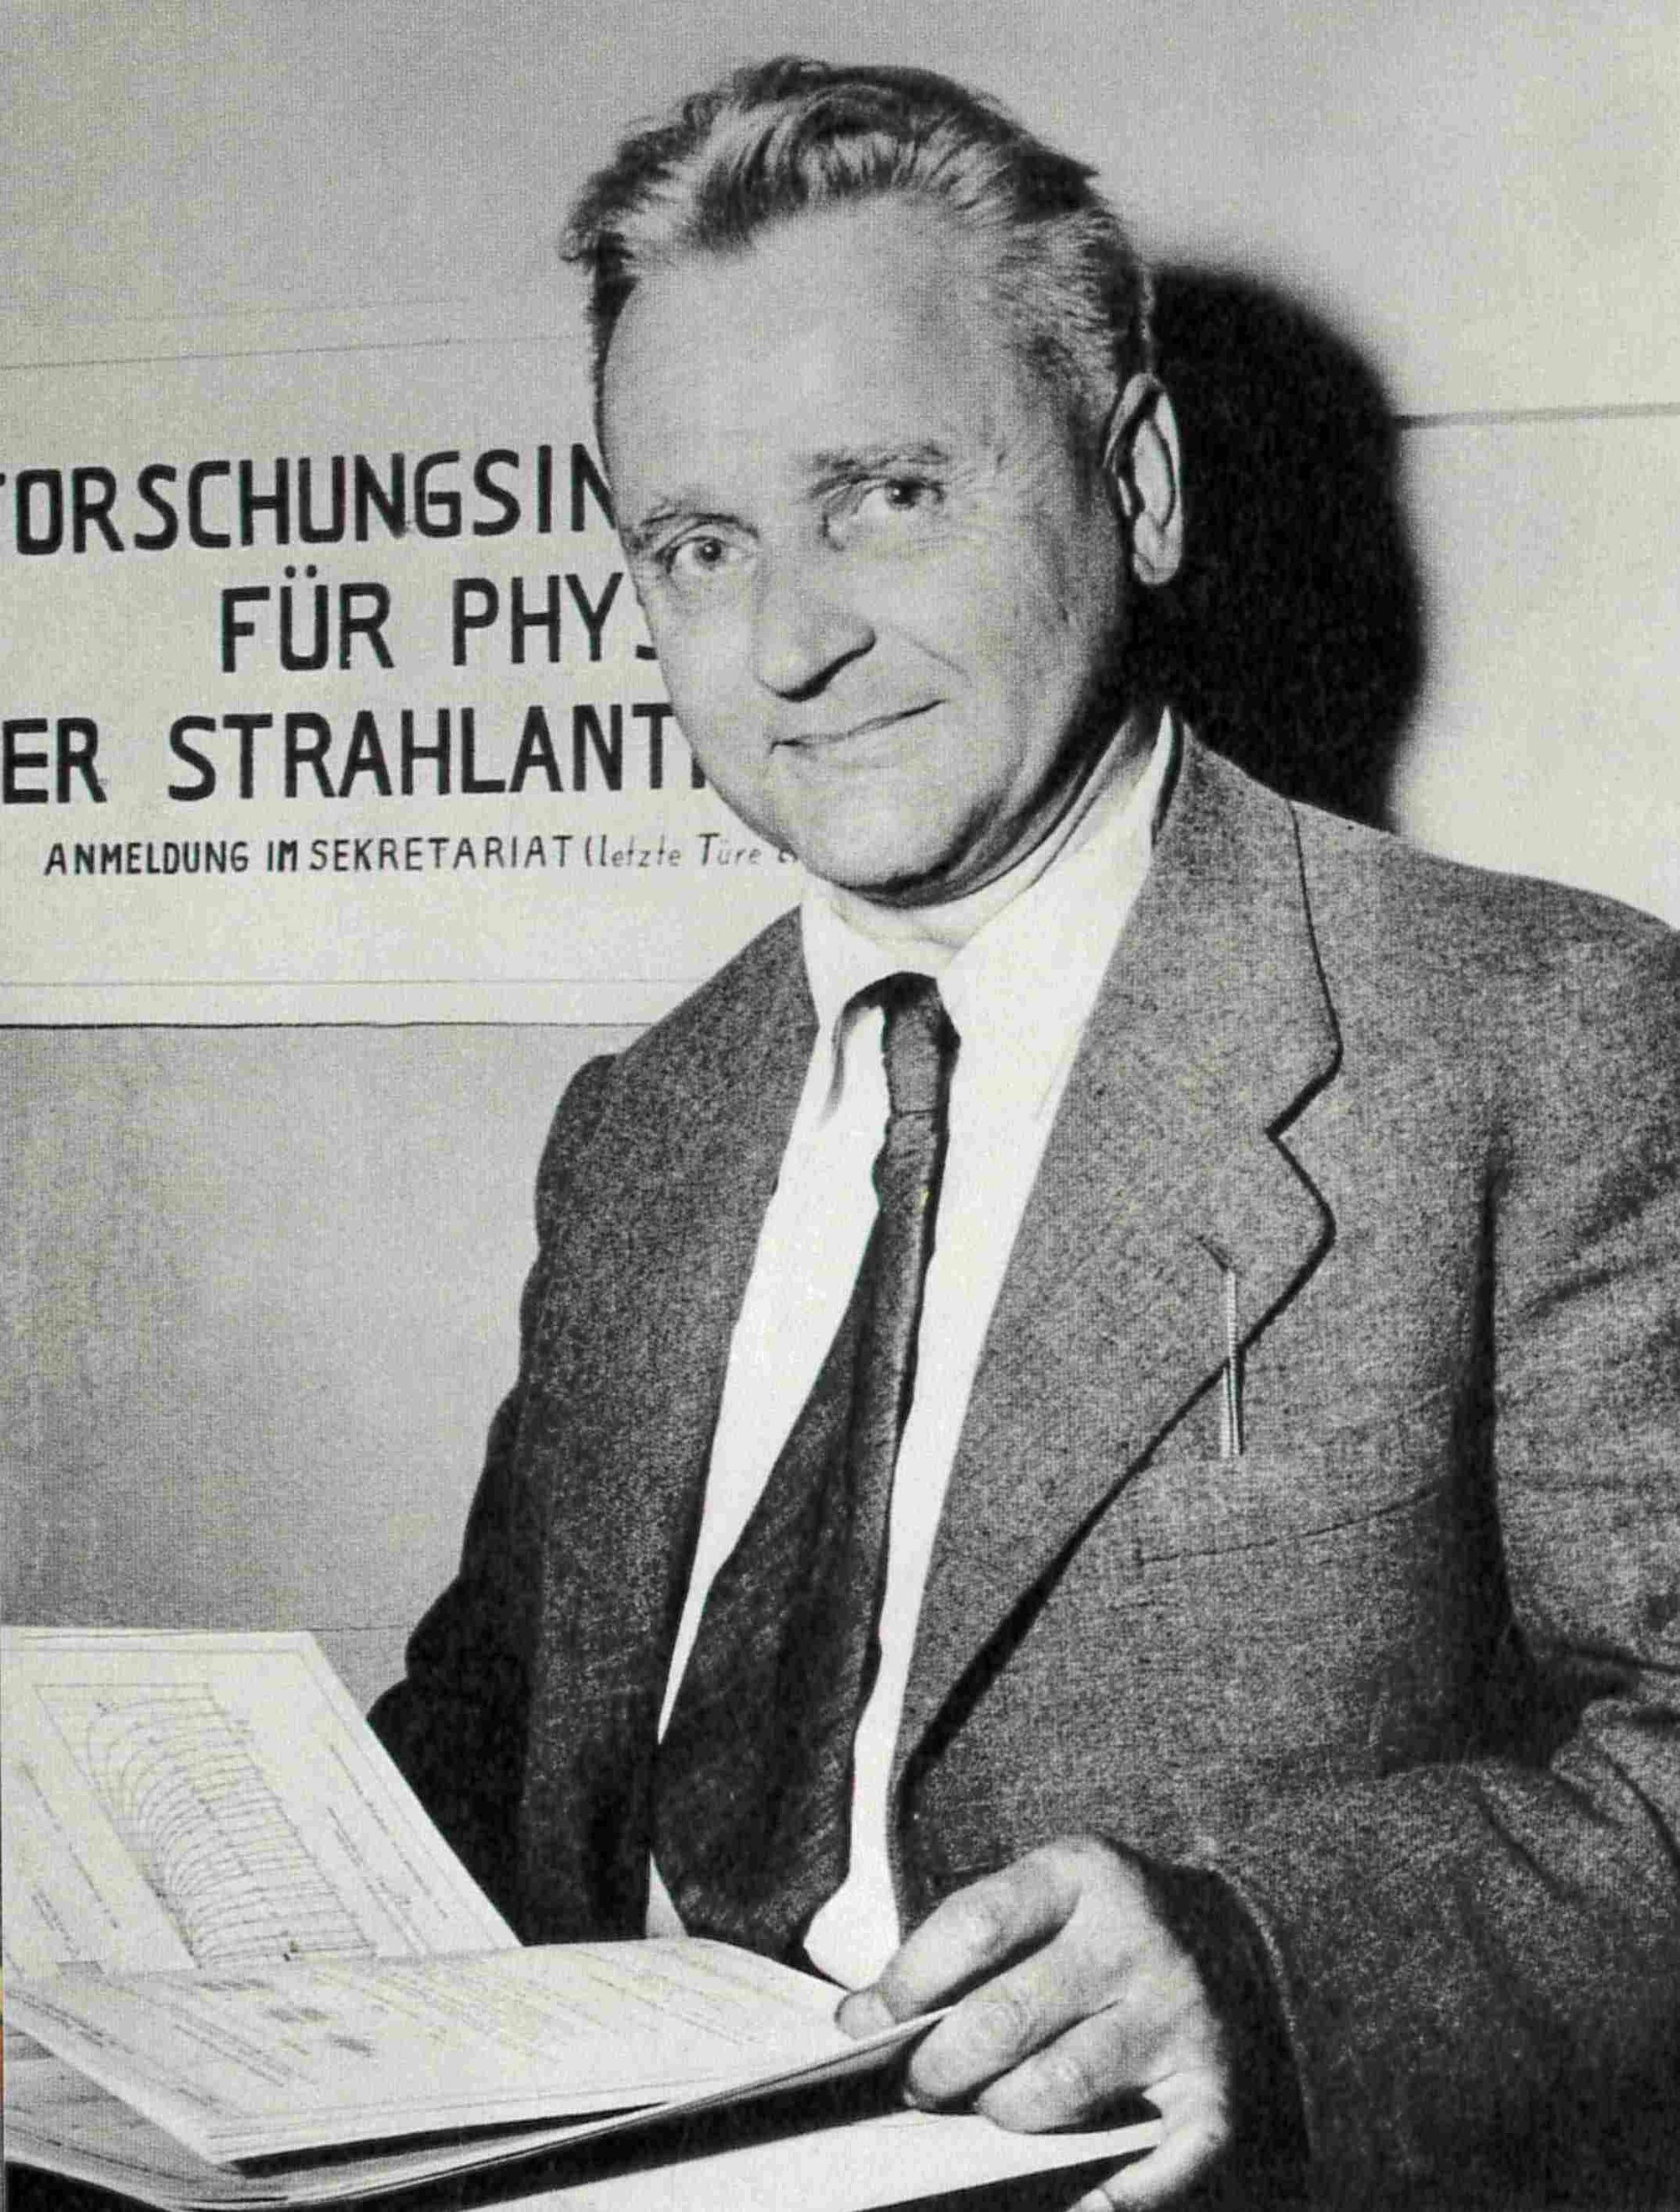 Professor Eugen Sänger founded the DLR site in Lampoldshausen in 1959